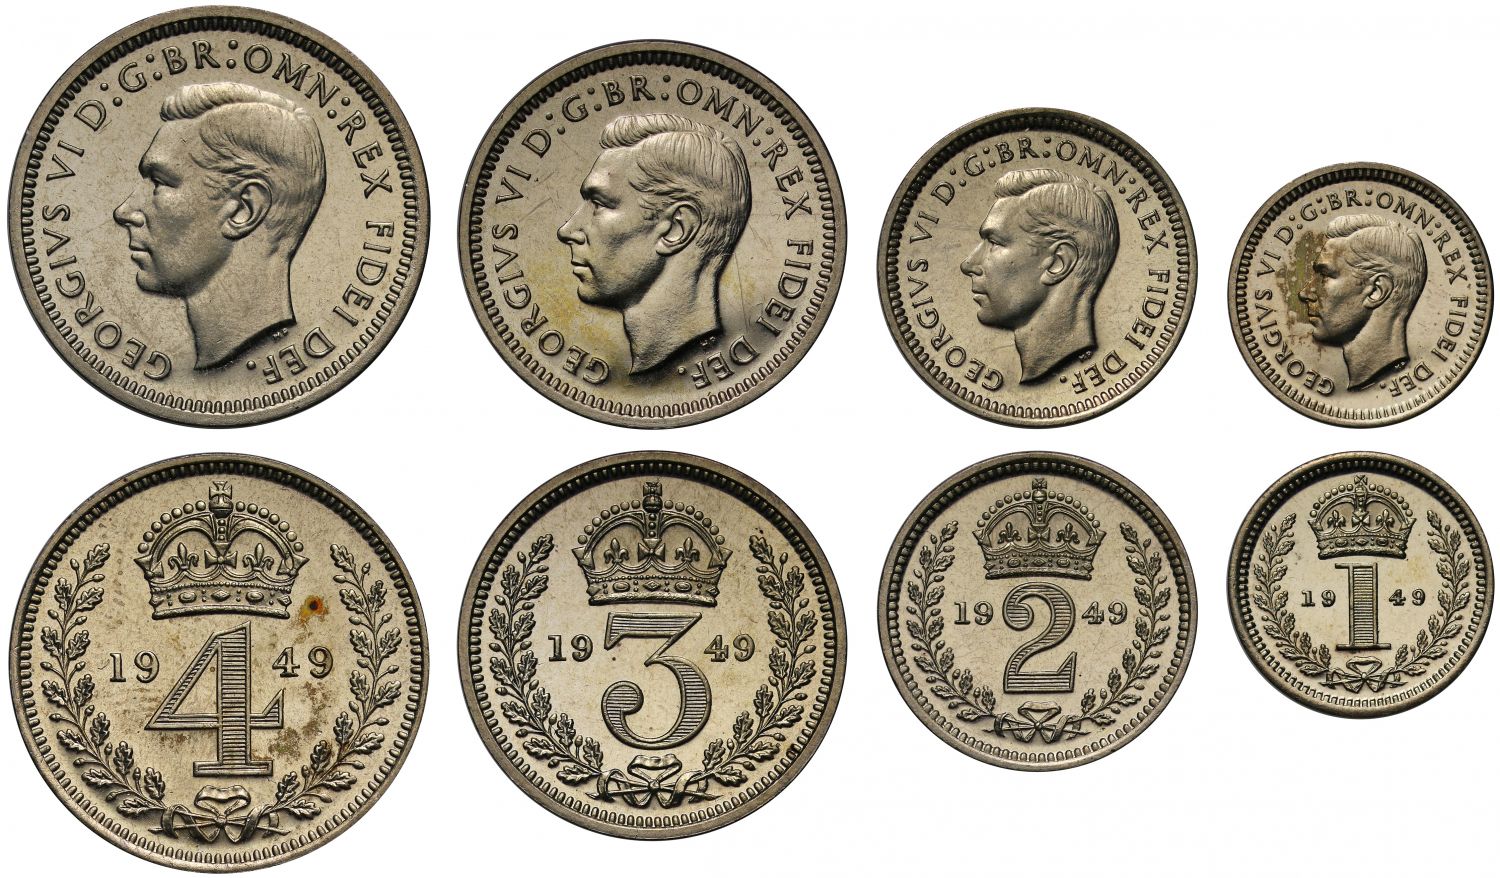 George VI 1949 Maundy Set, first year Emperor of India title no longer appears